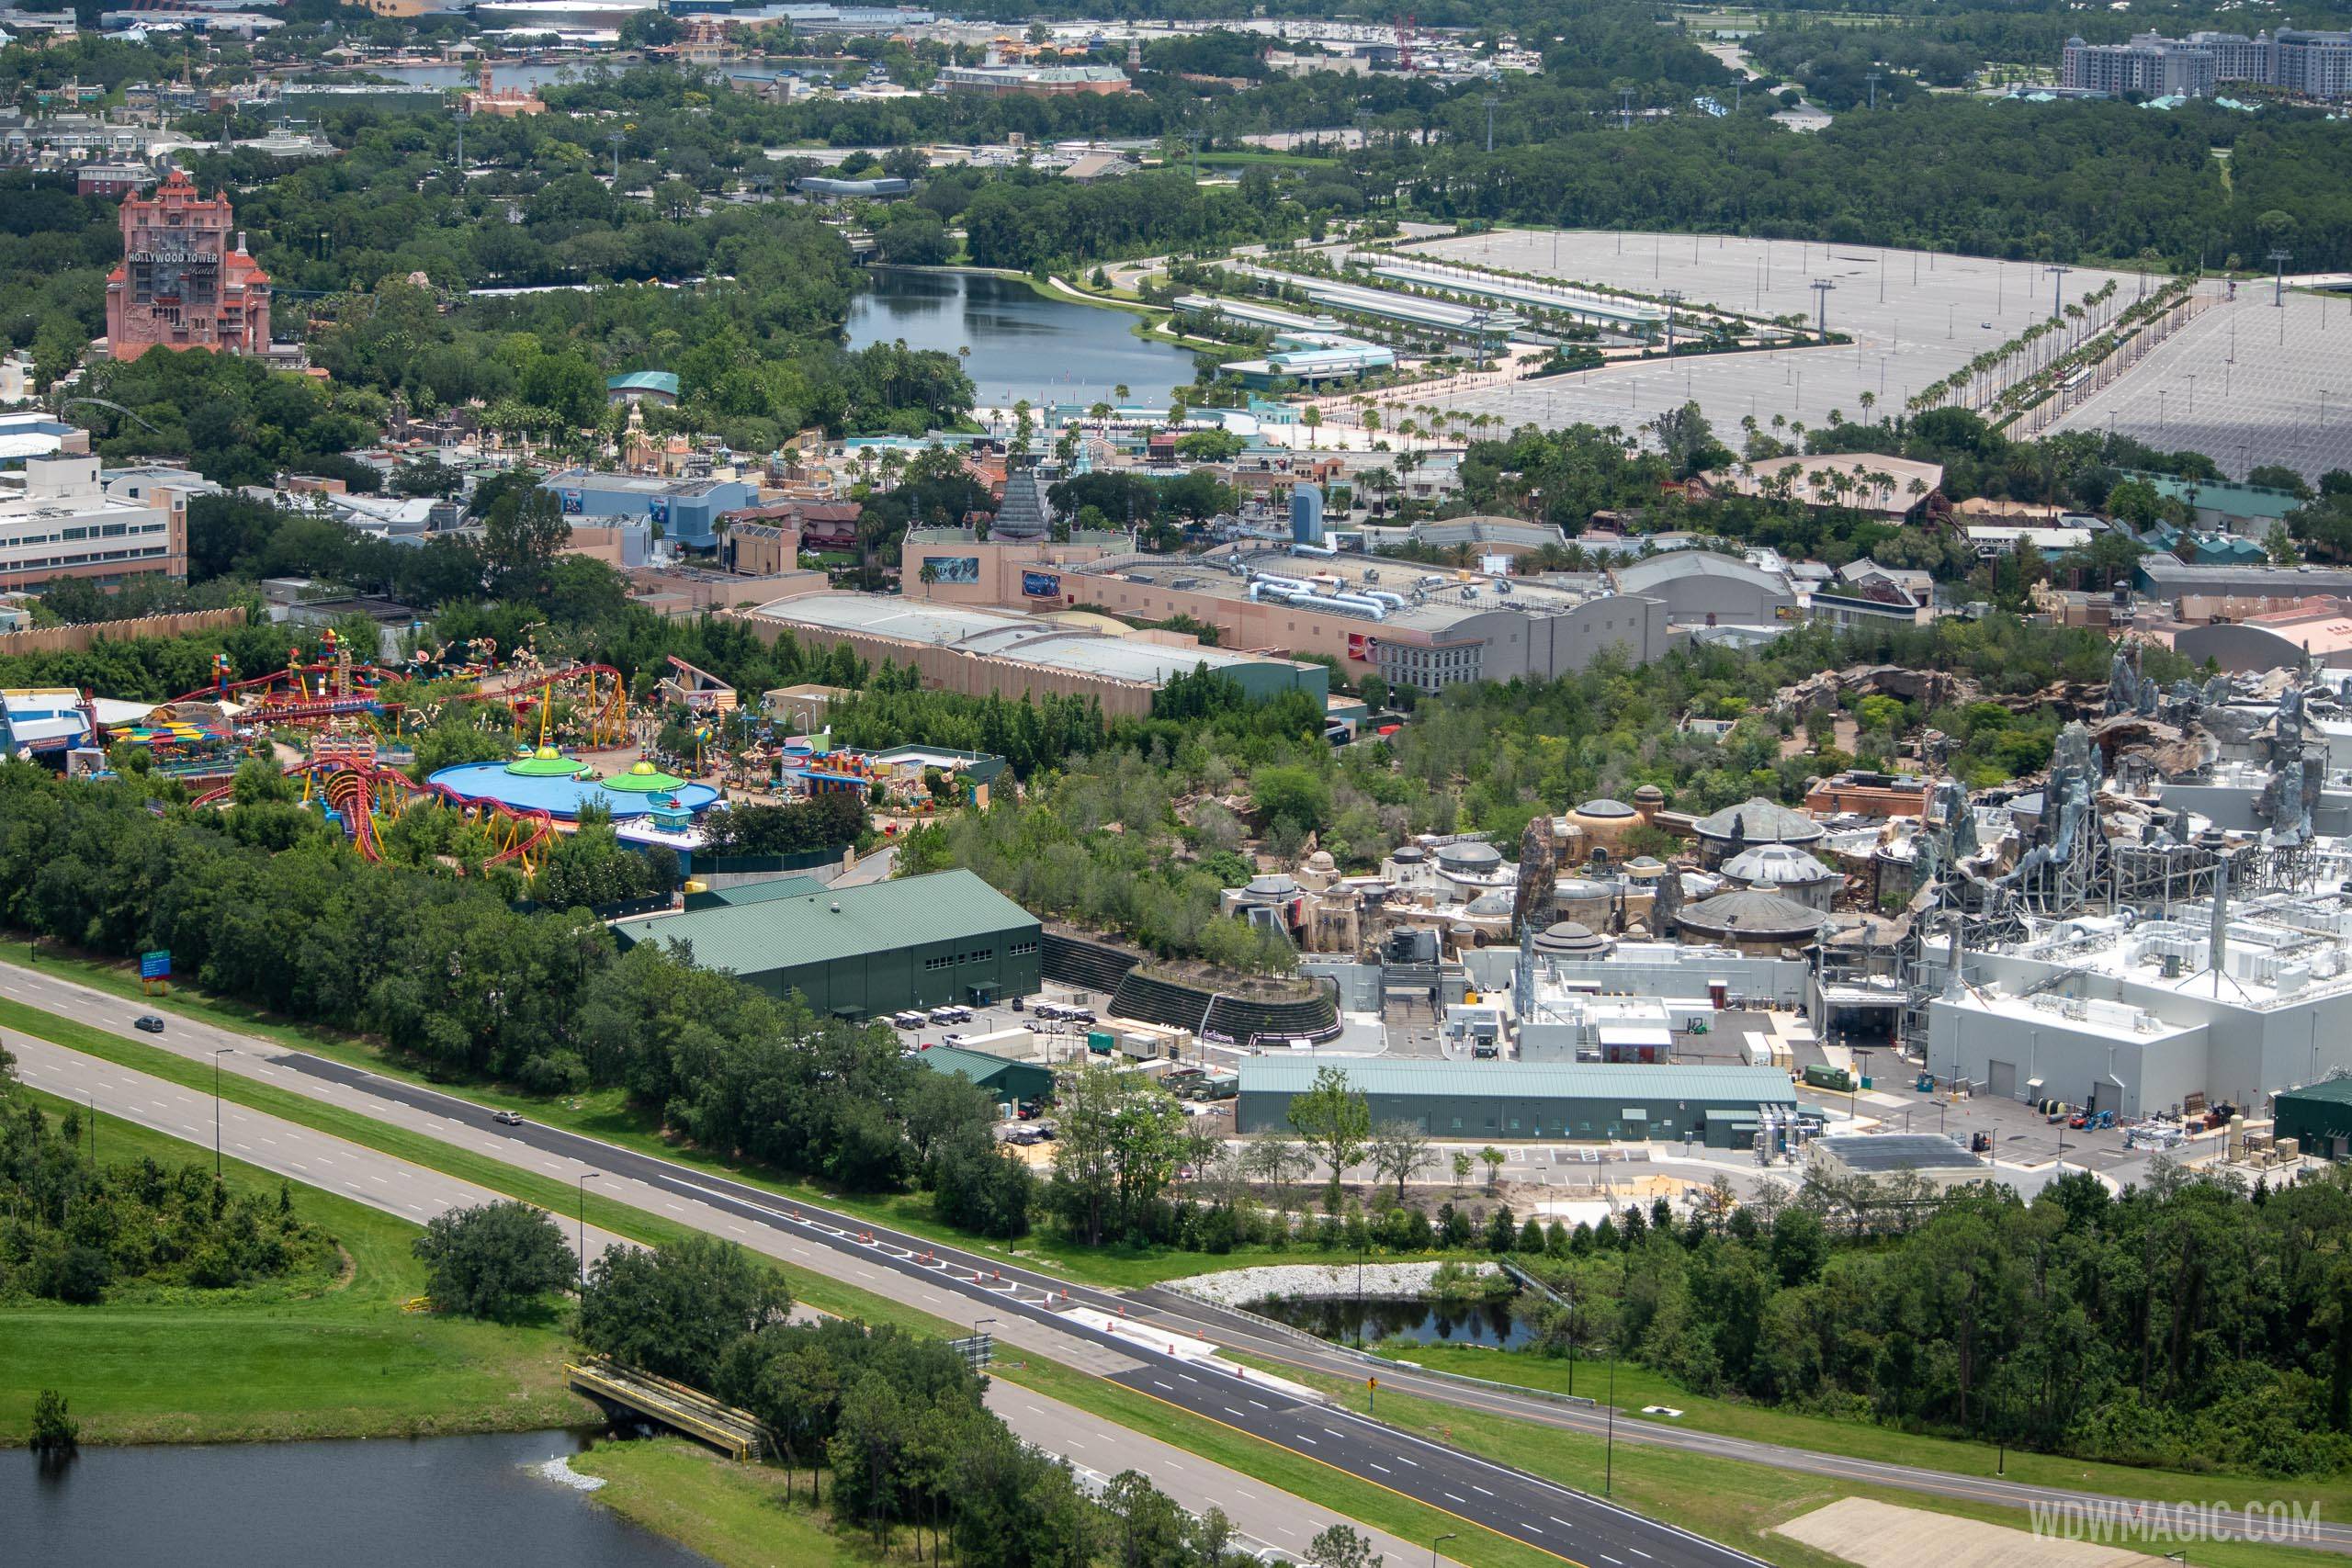 PHOTOS - Aerial views of an empty Disney's Hollywood Studios ahead of this week's reopening